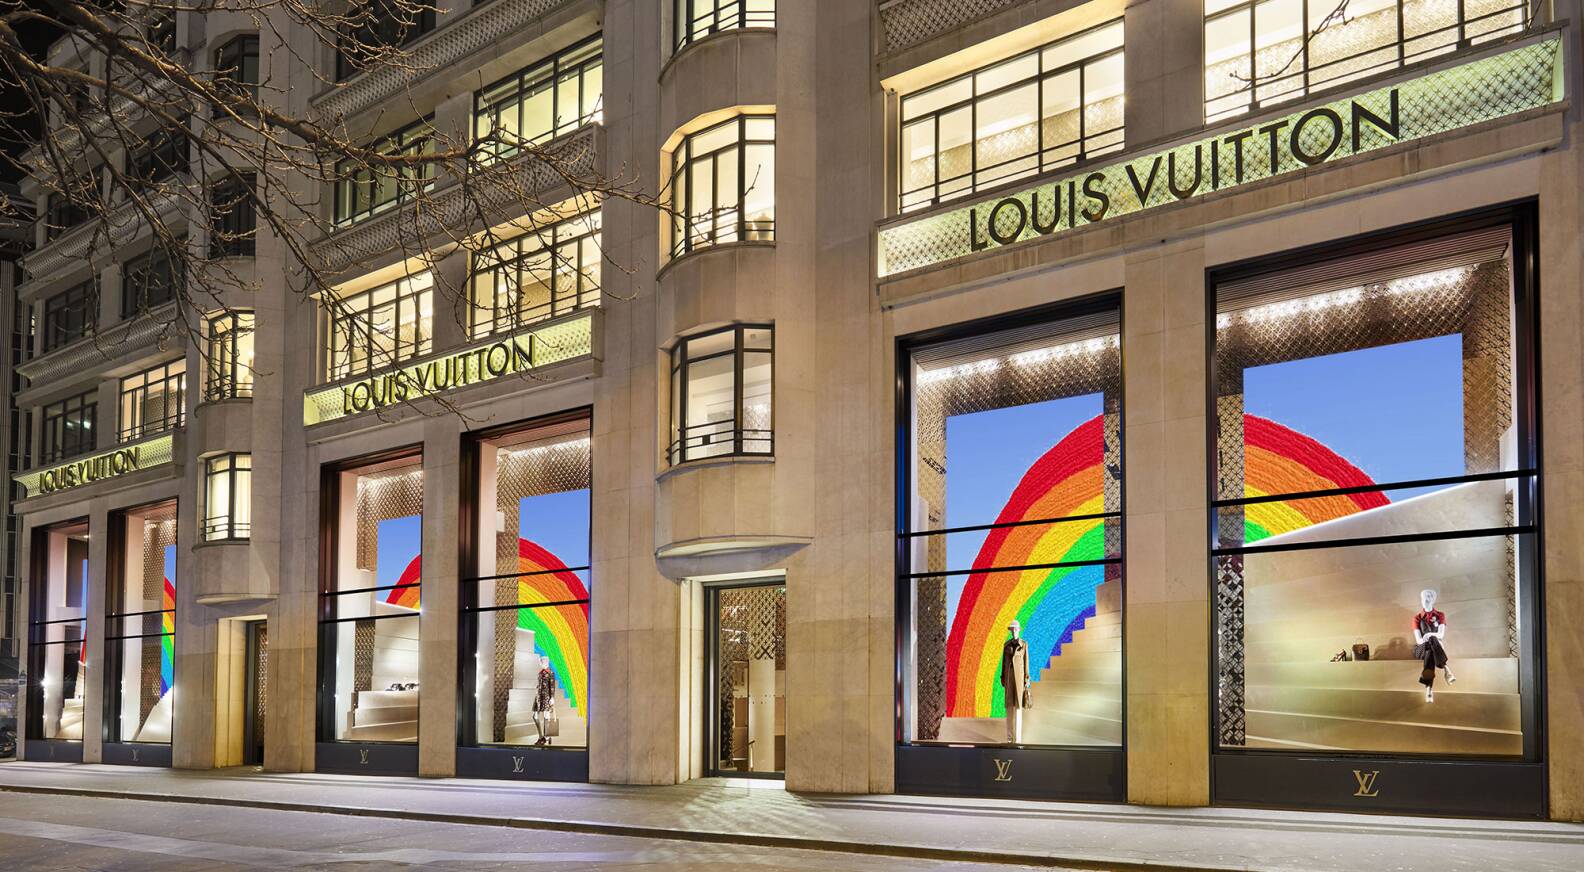 LVMH's brands include Louis Vuitton, Dior, Bulgari, Tag Heuer, Sephora, and  Hennessy.